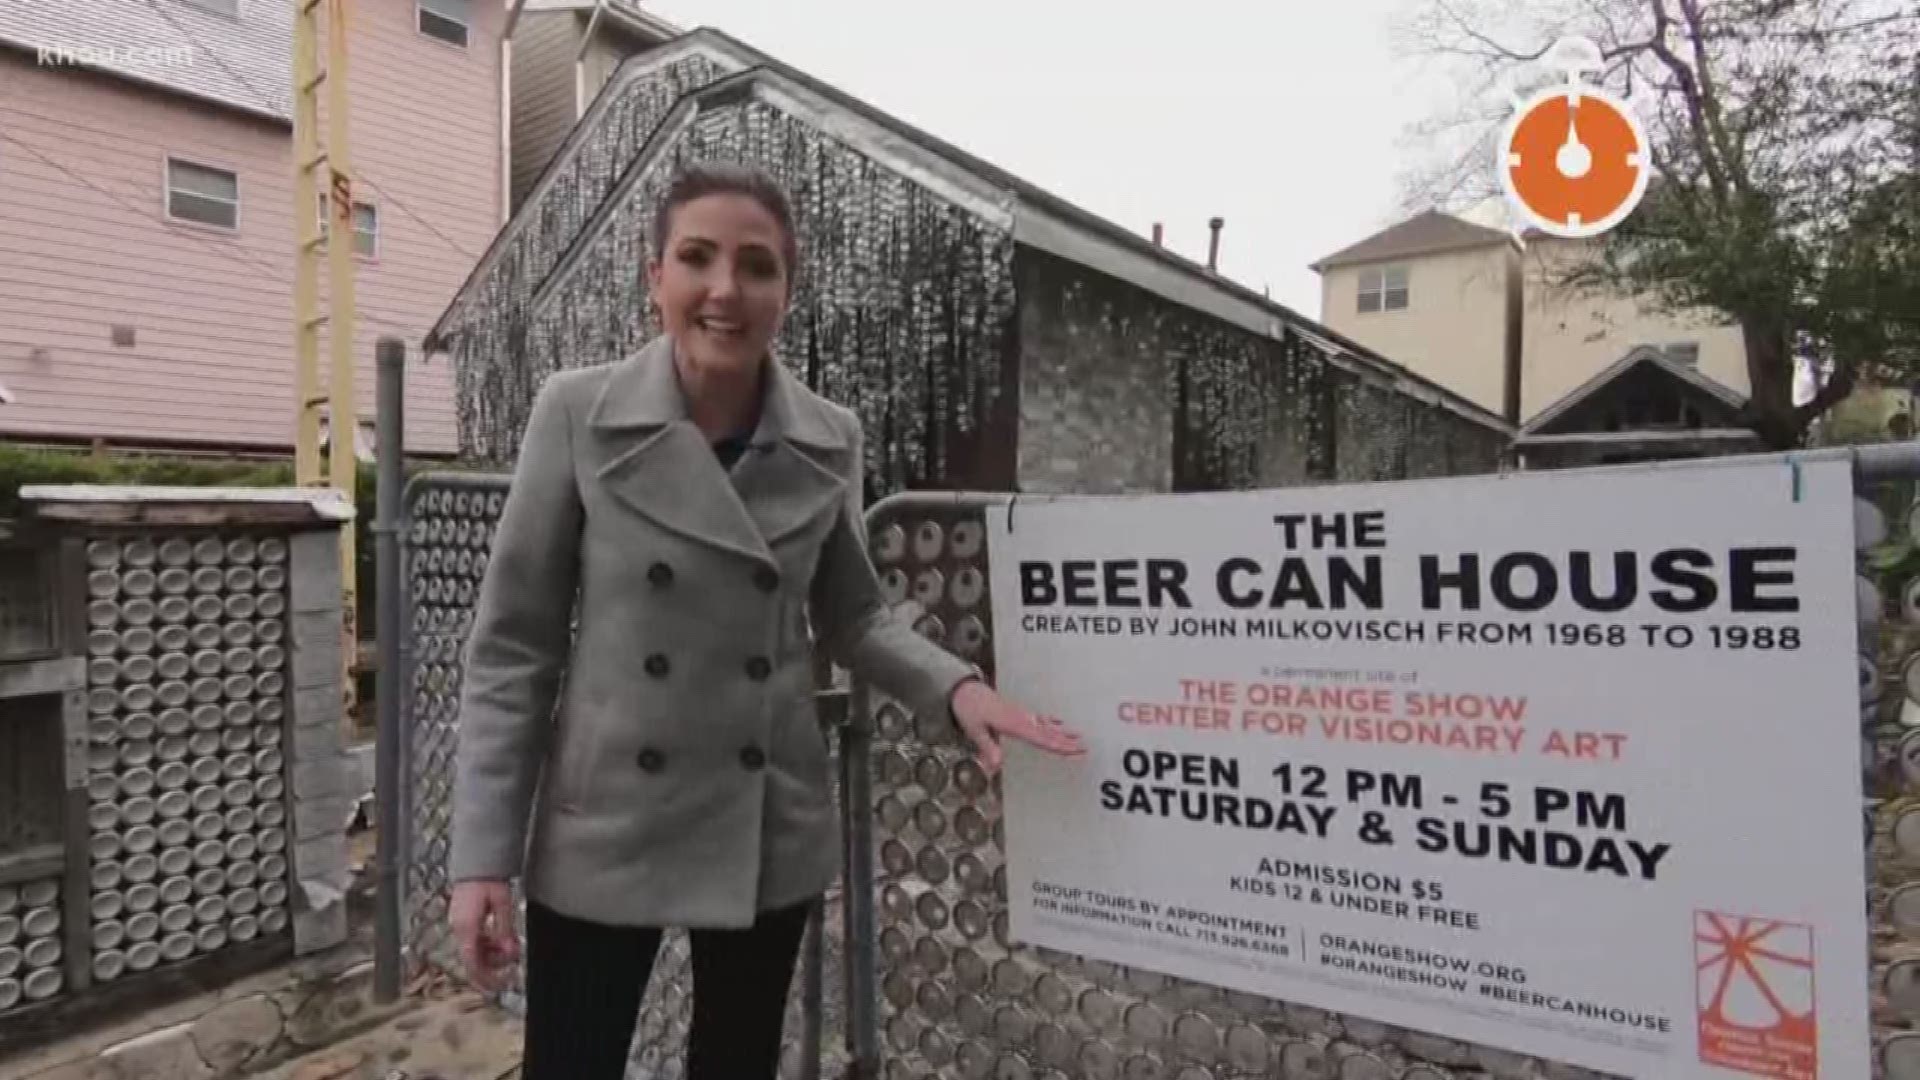 Jan. 24 is Beer Can Appreciation Day! Where better to celebrate than Houston's own Beer Can House?